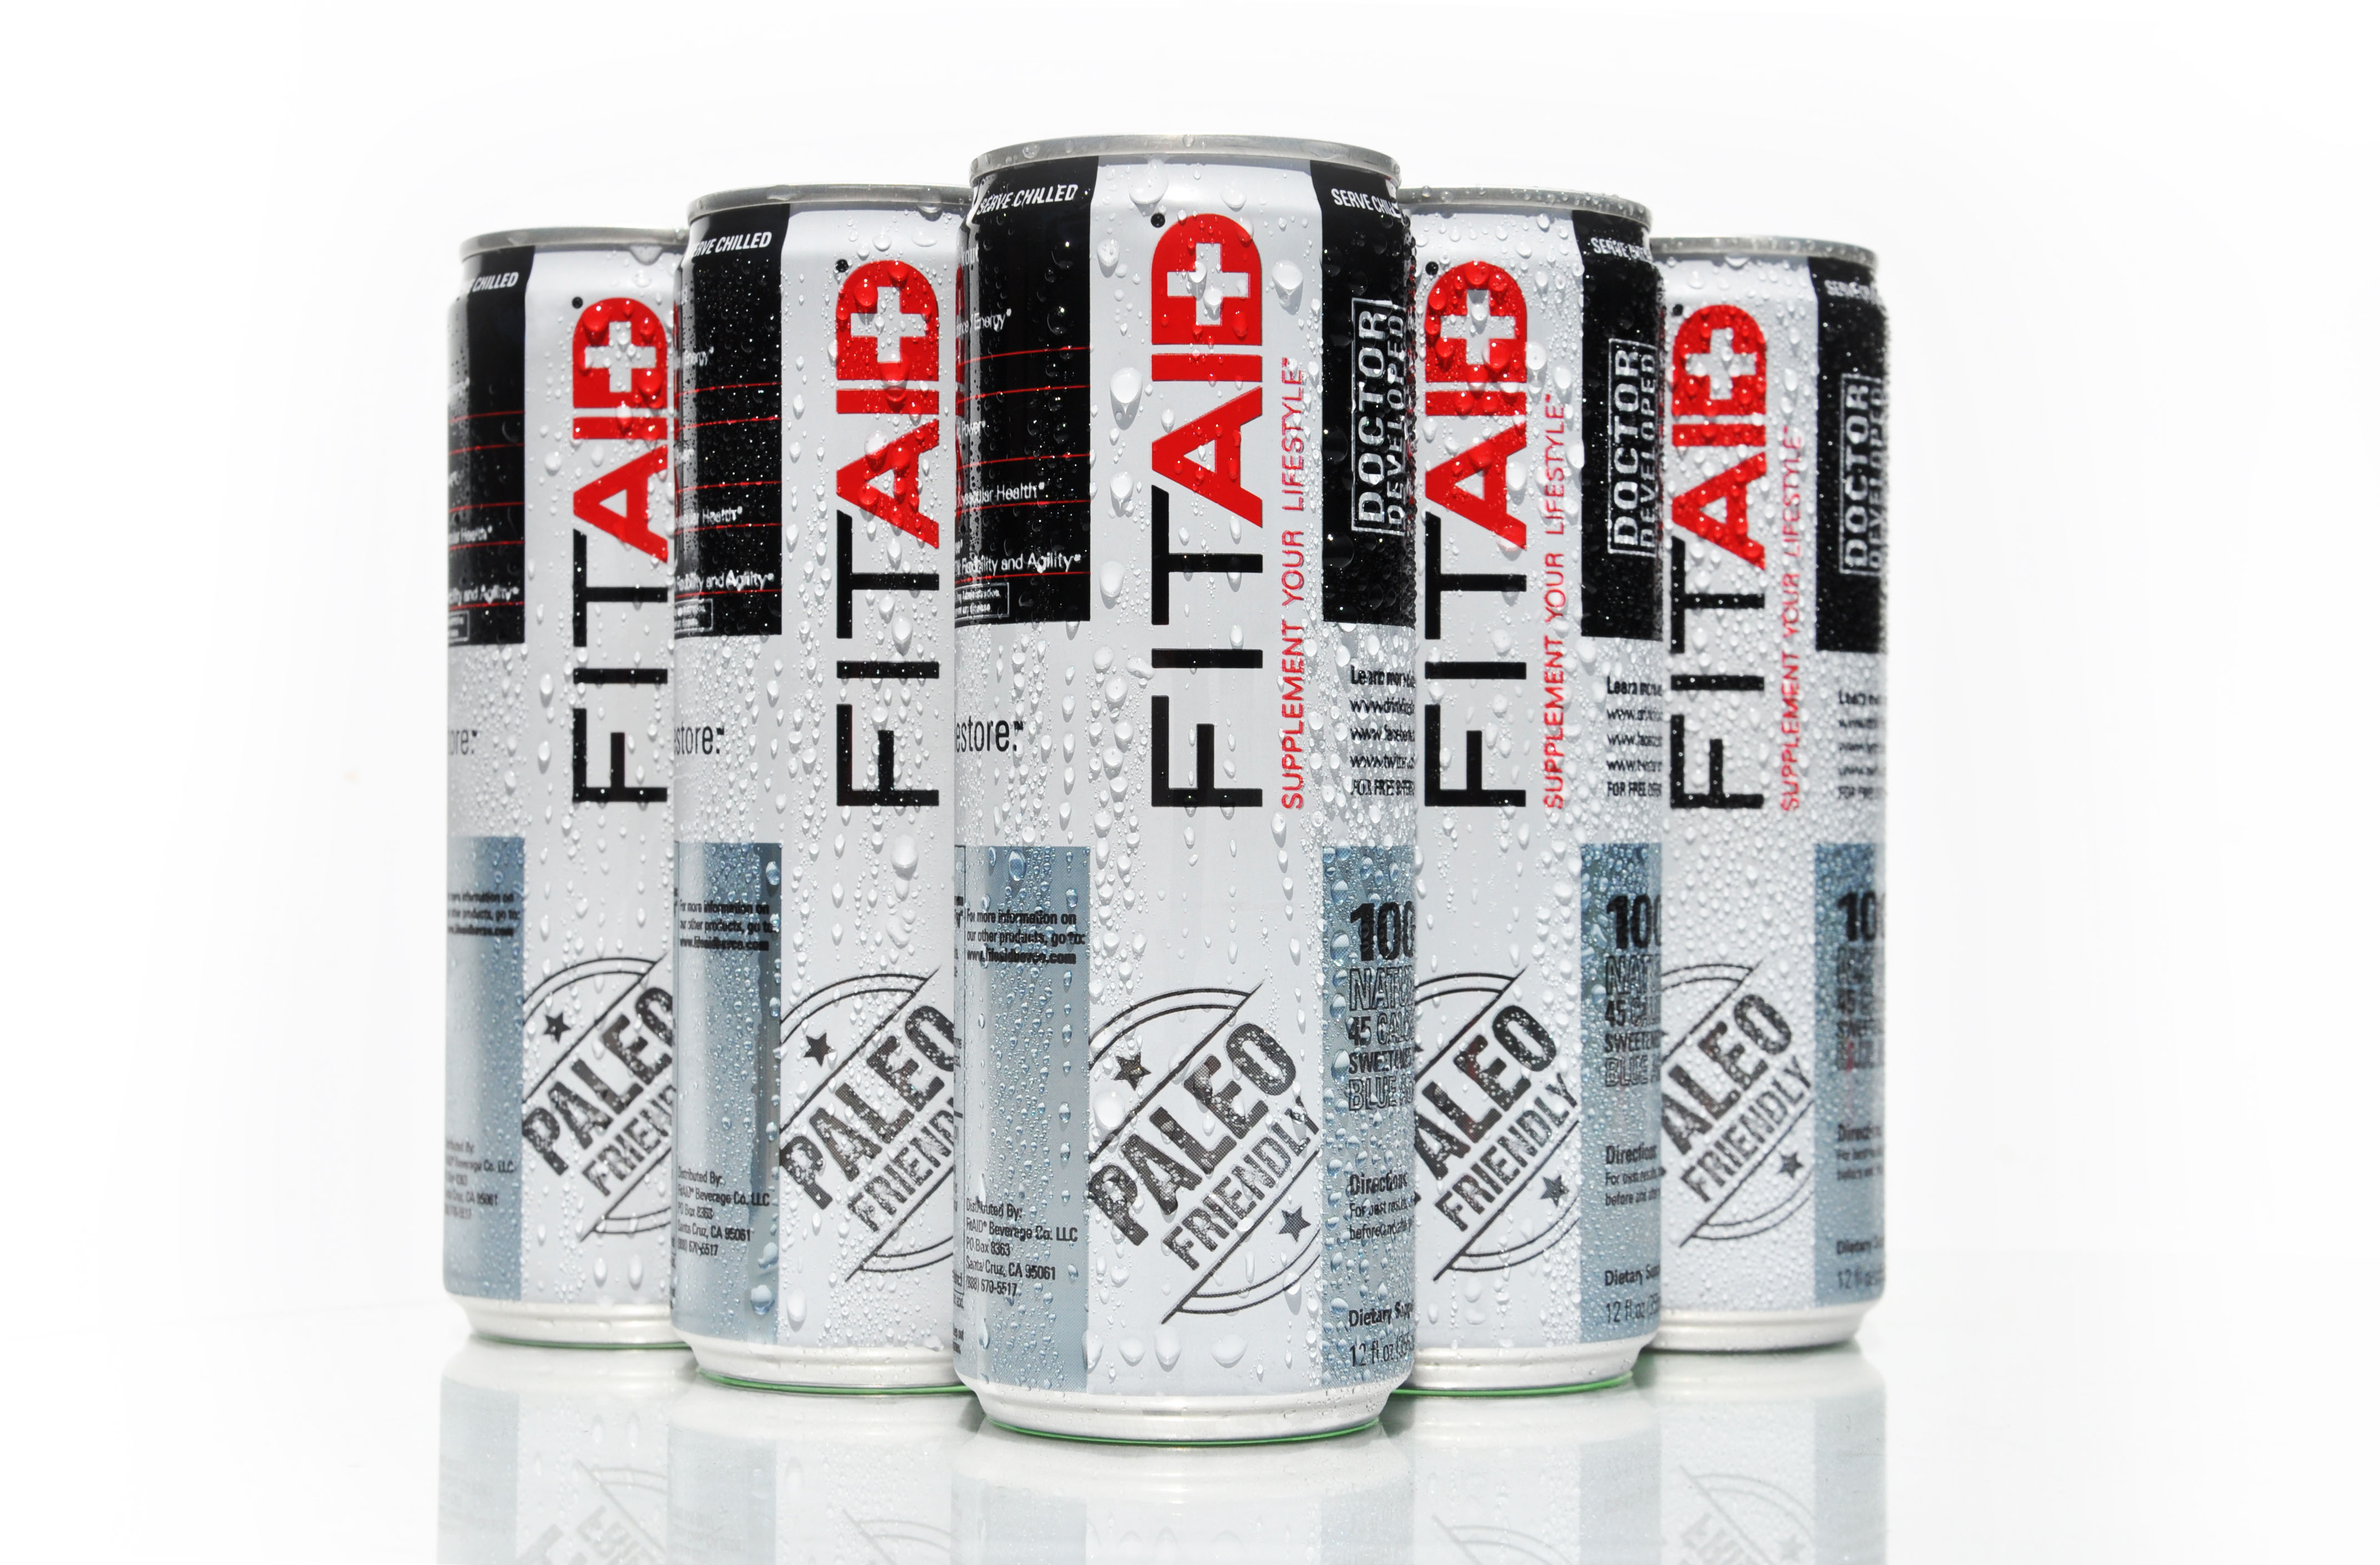 FitAID is available in packs of four or by the can to drink as a nutritional supplement pre and post workouts.